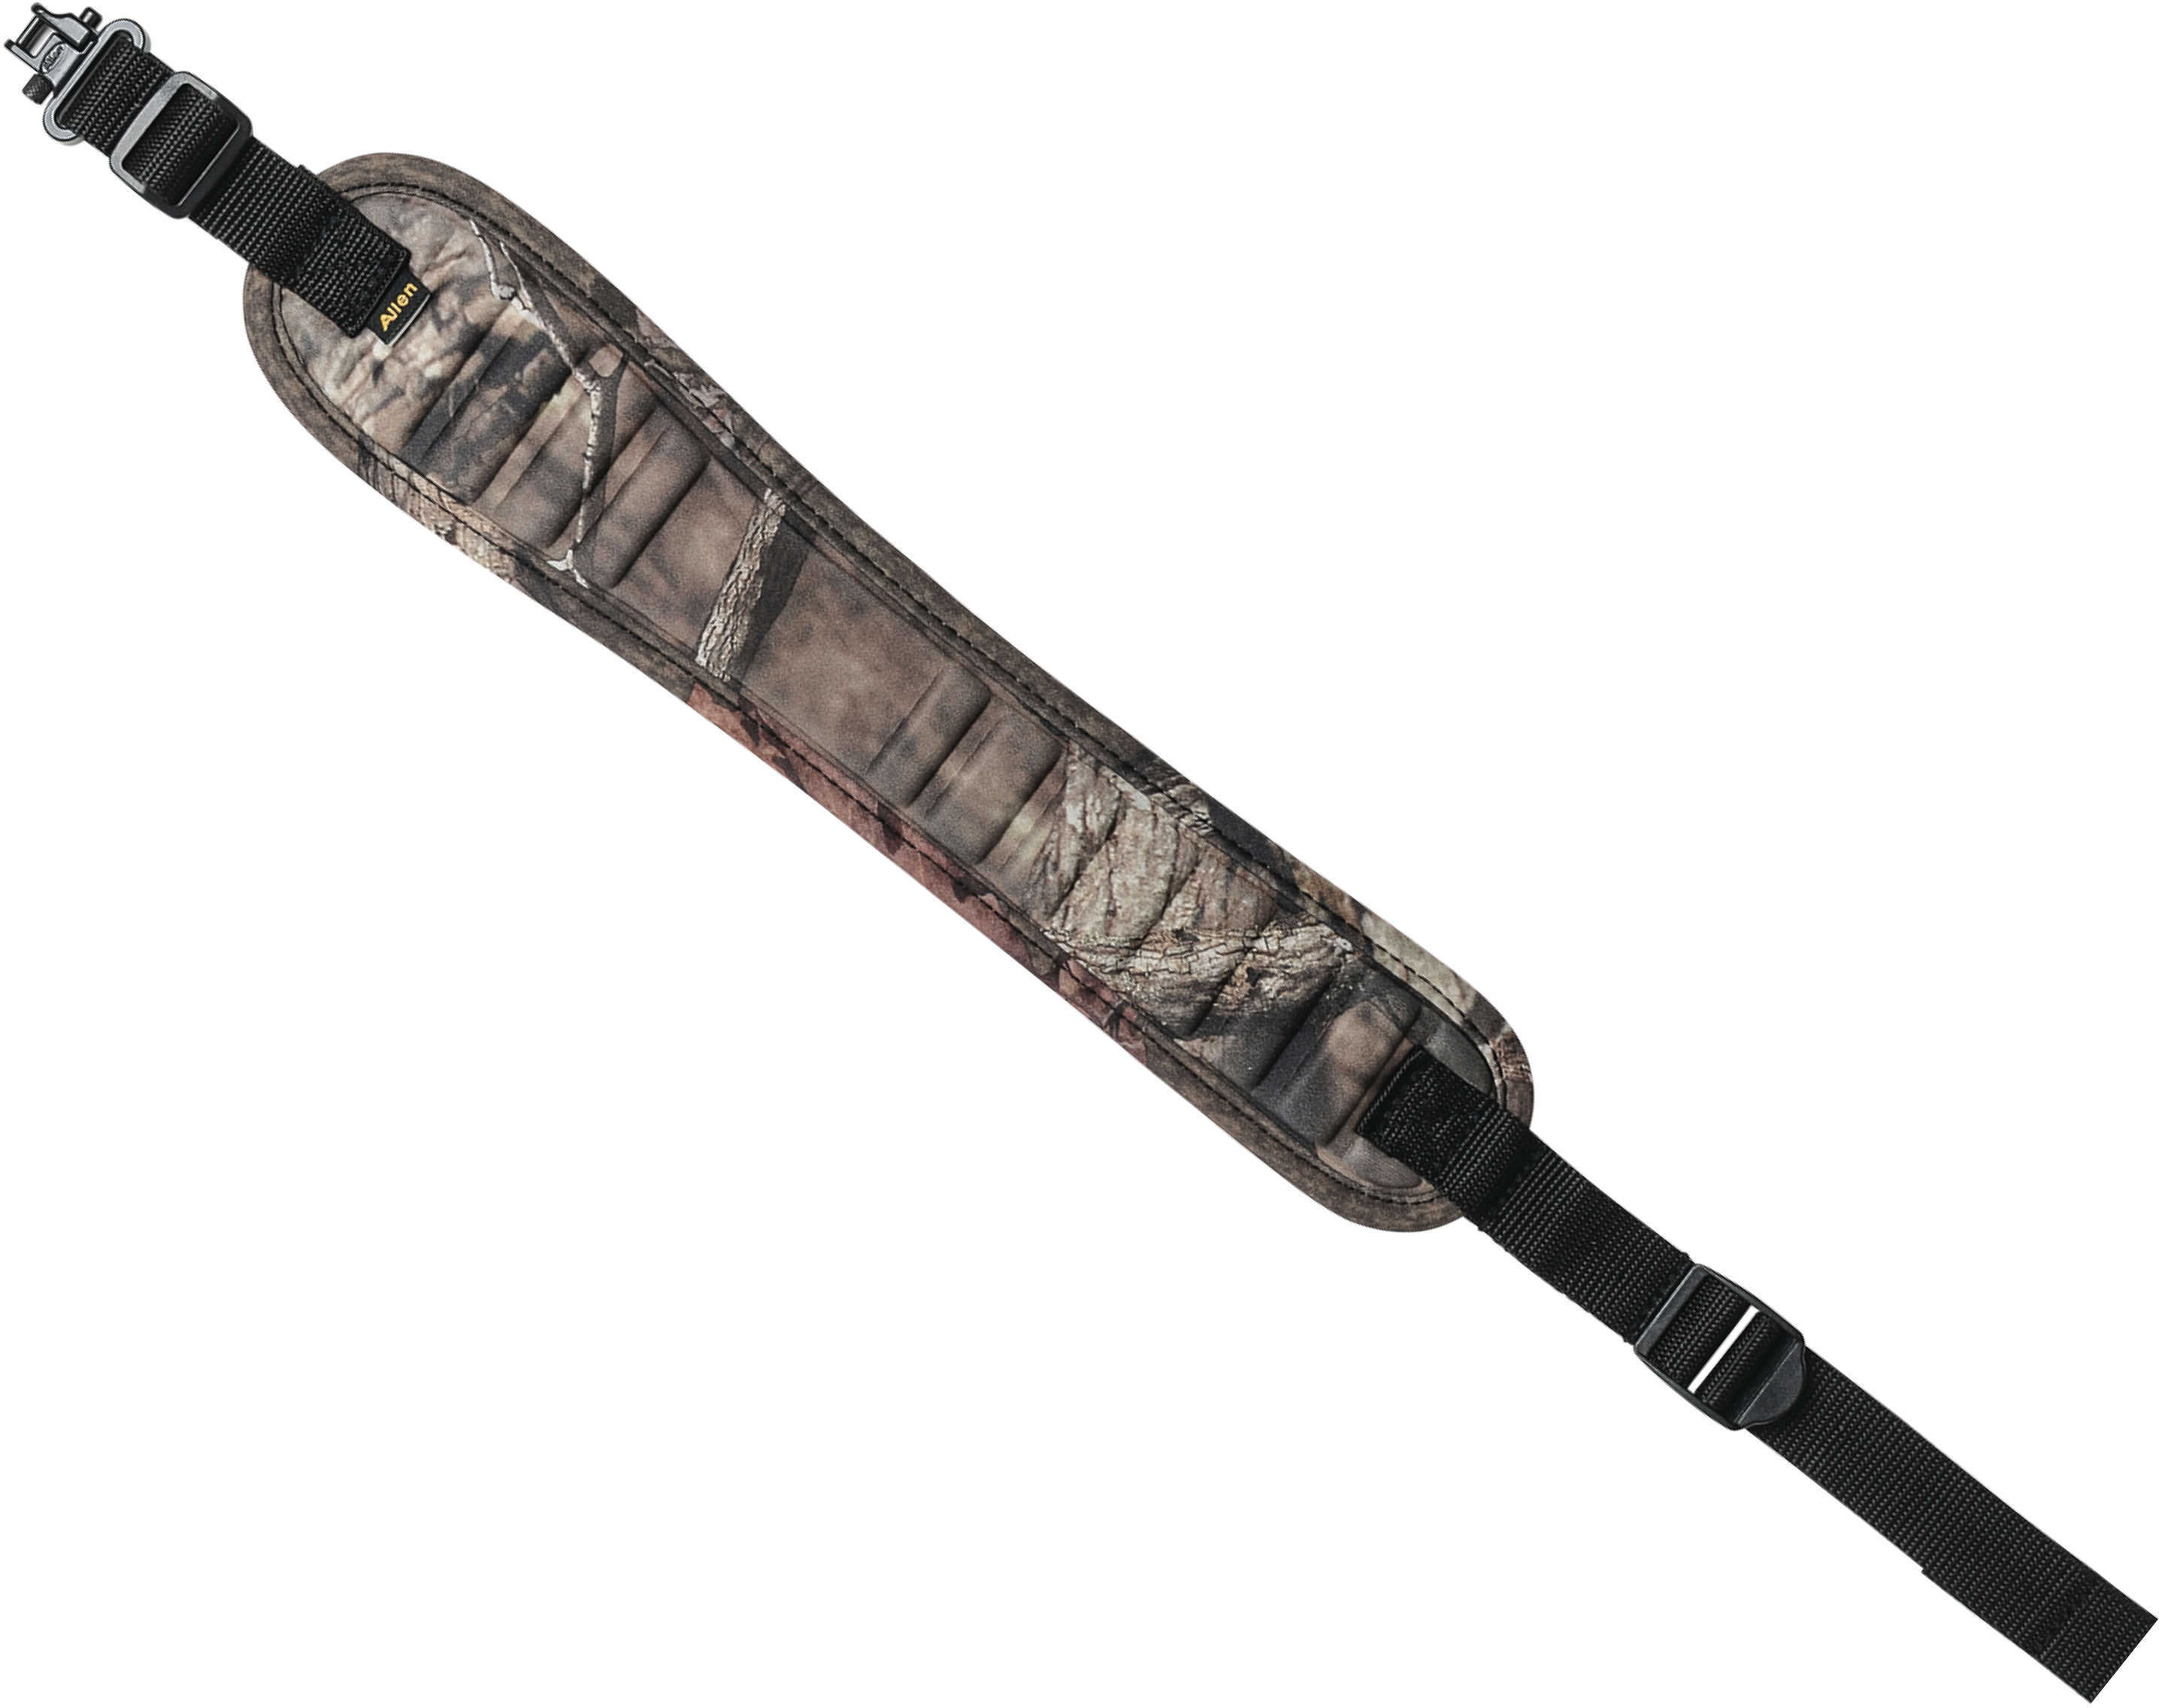 Allen Cases High Country Rifle Sling With Swivels Camo